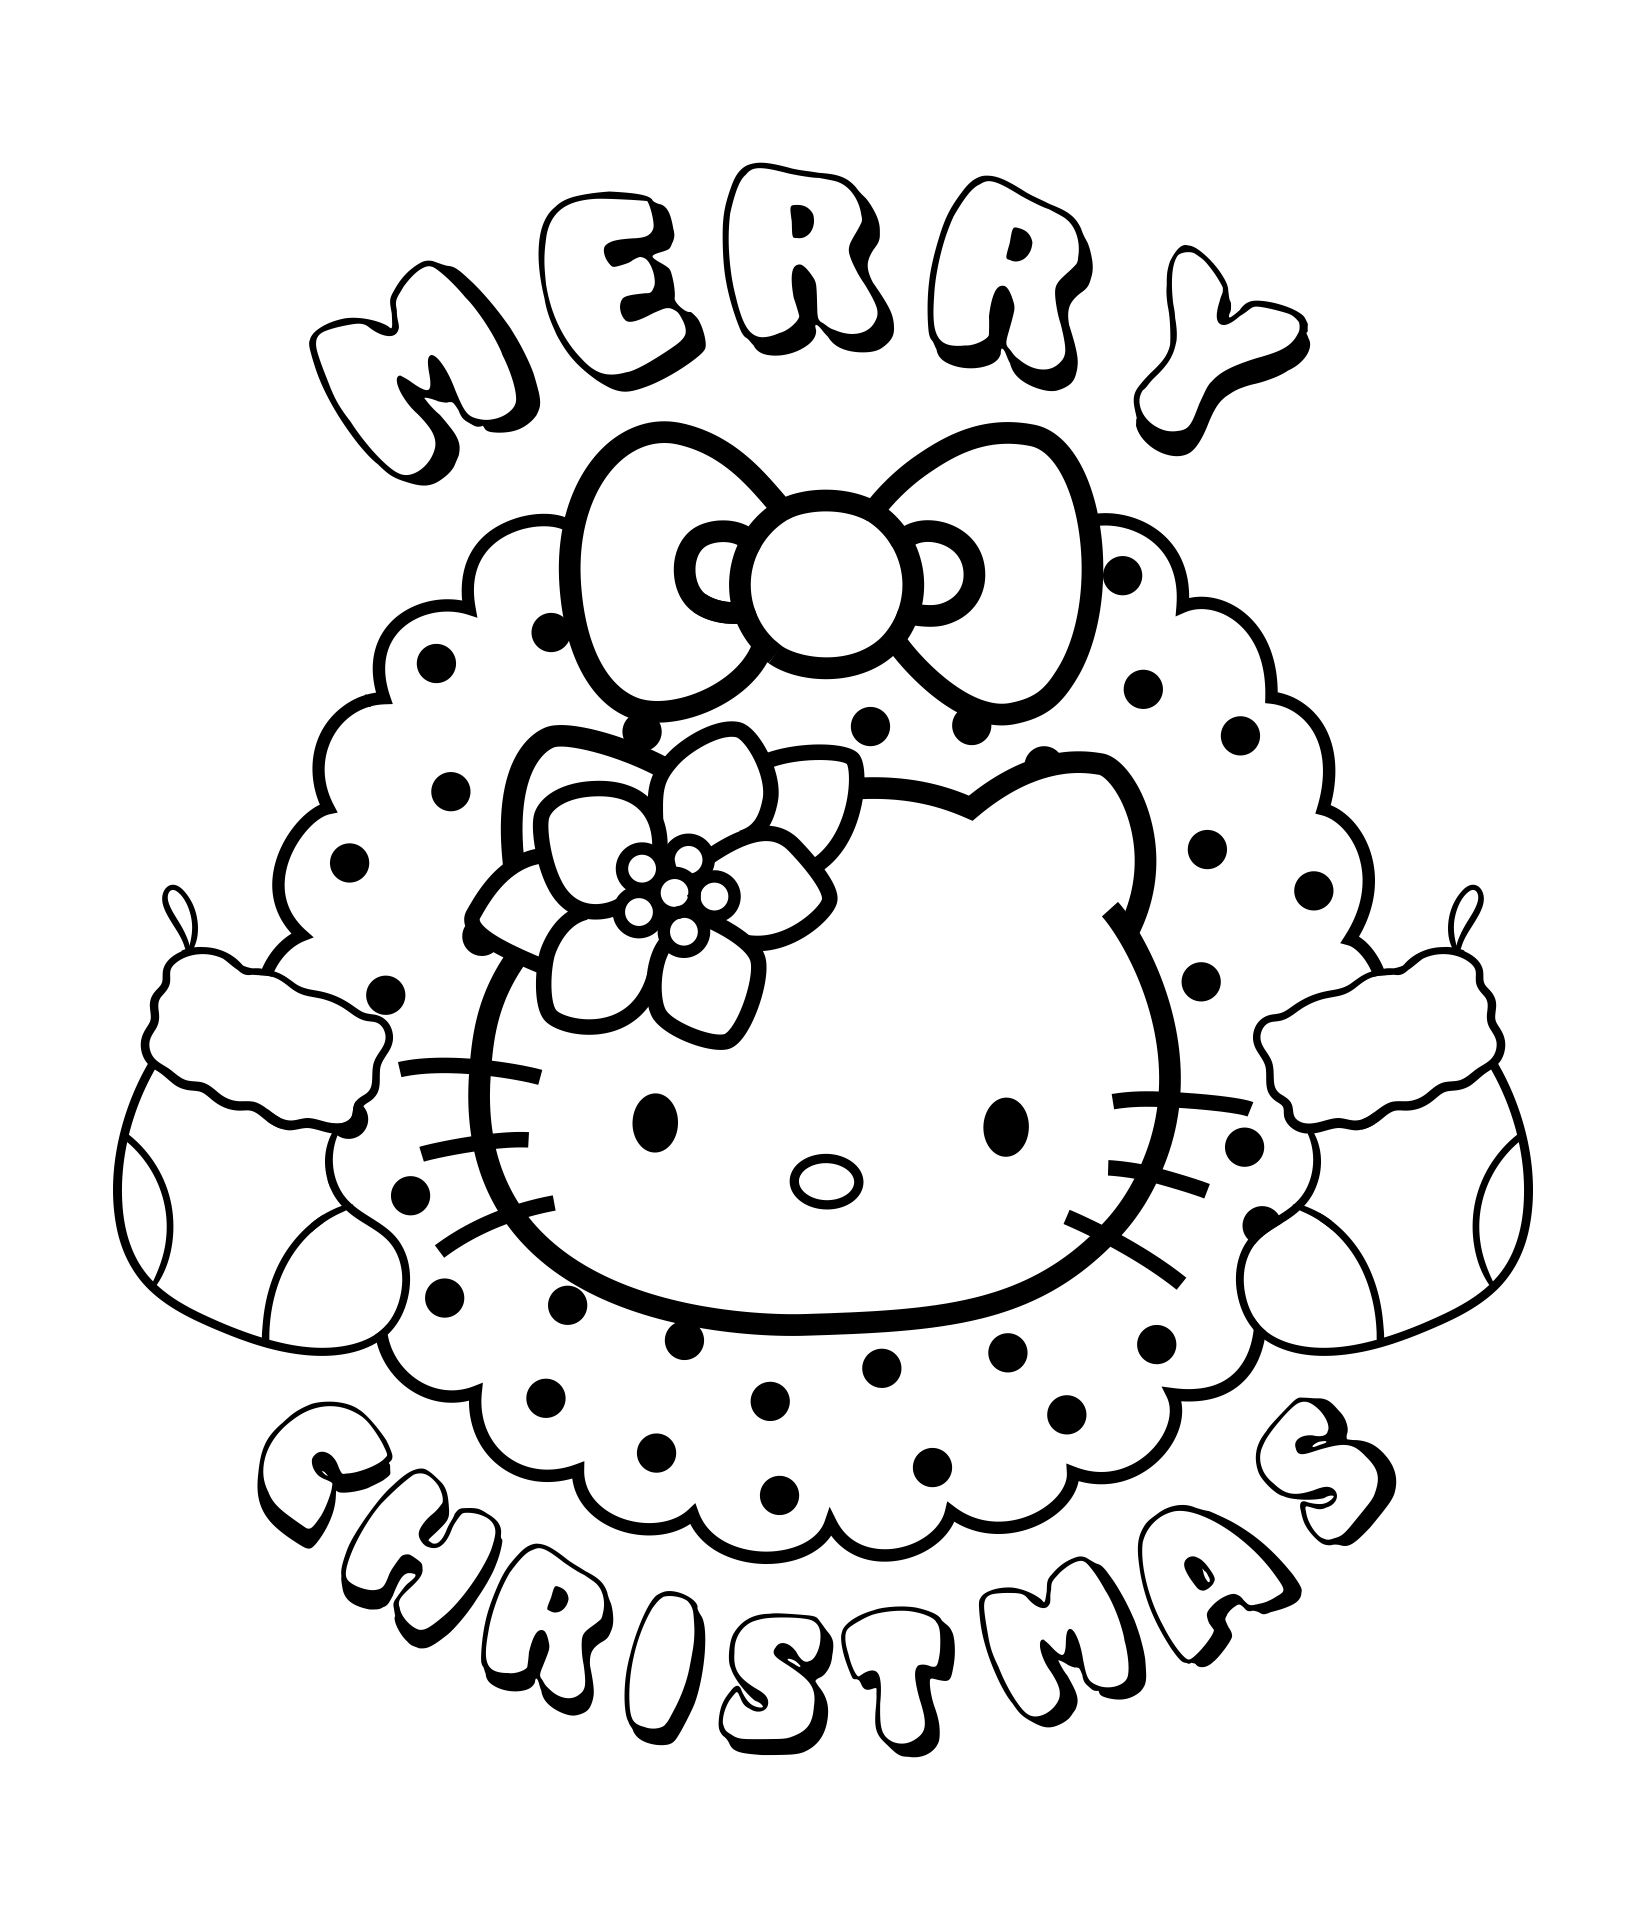 Hello Kitty Christmas Coloring Pages Printables